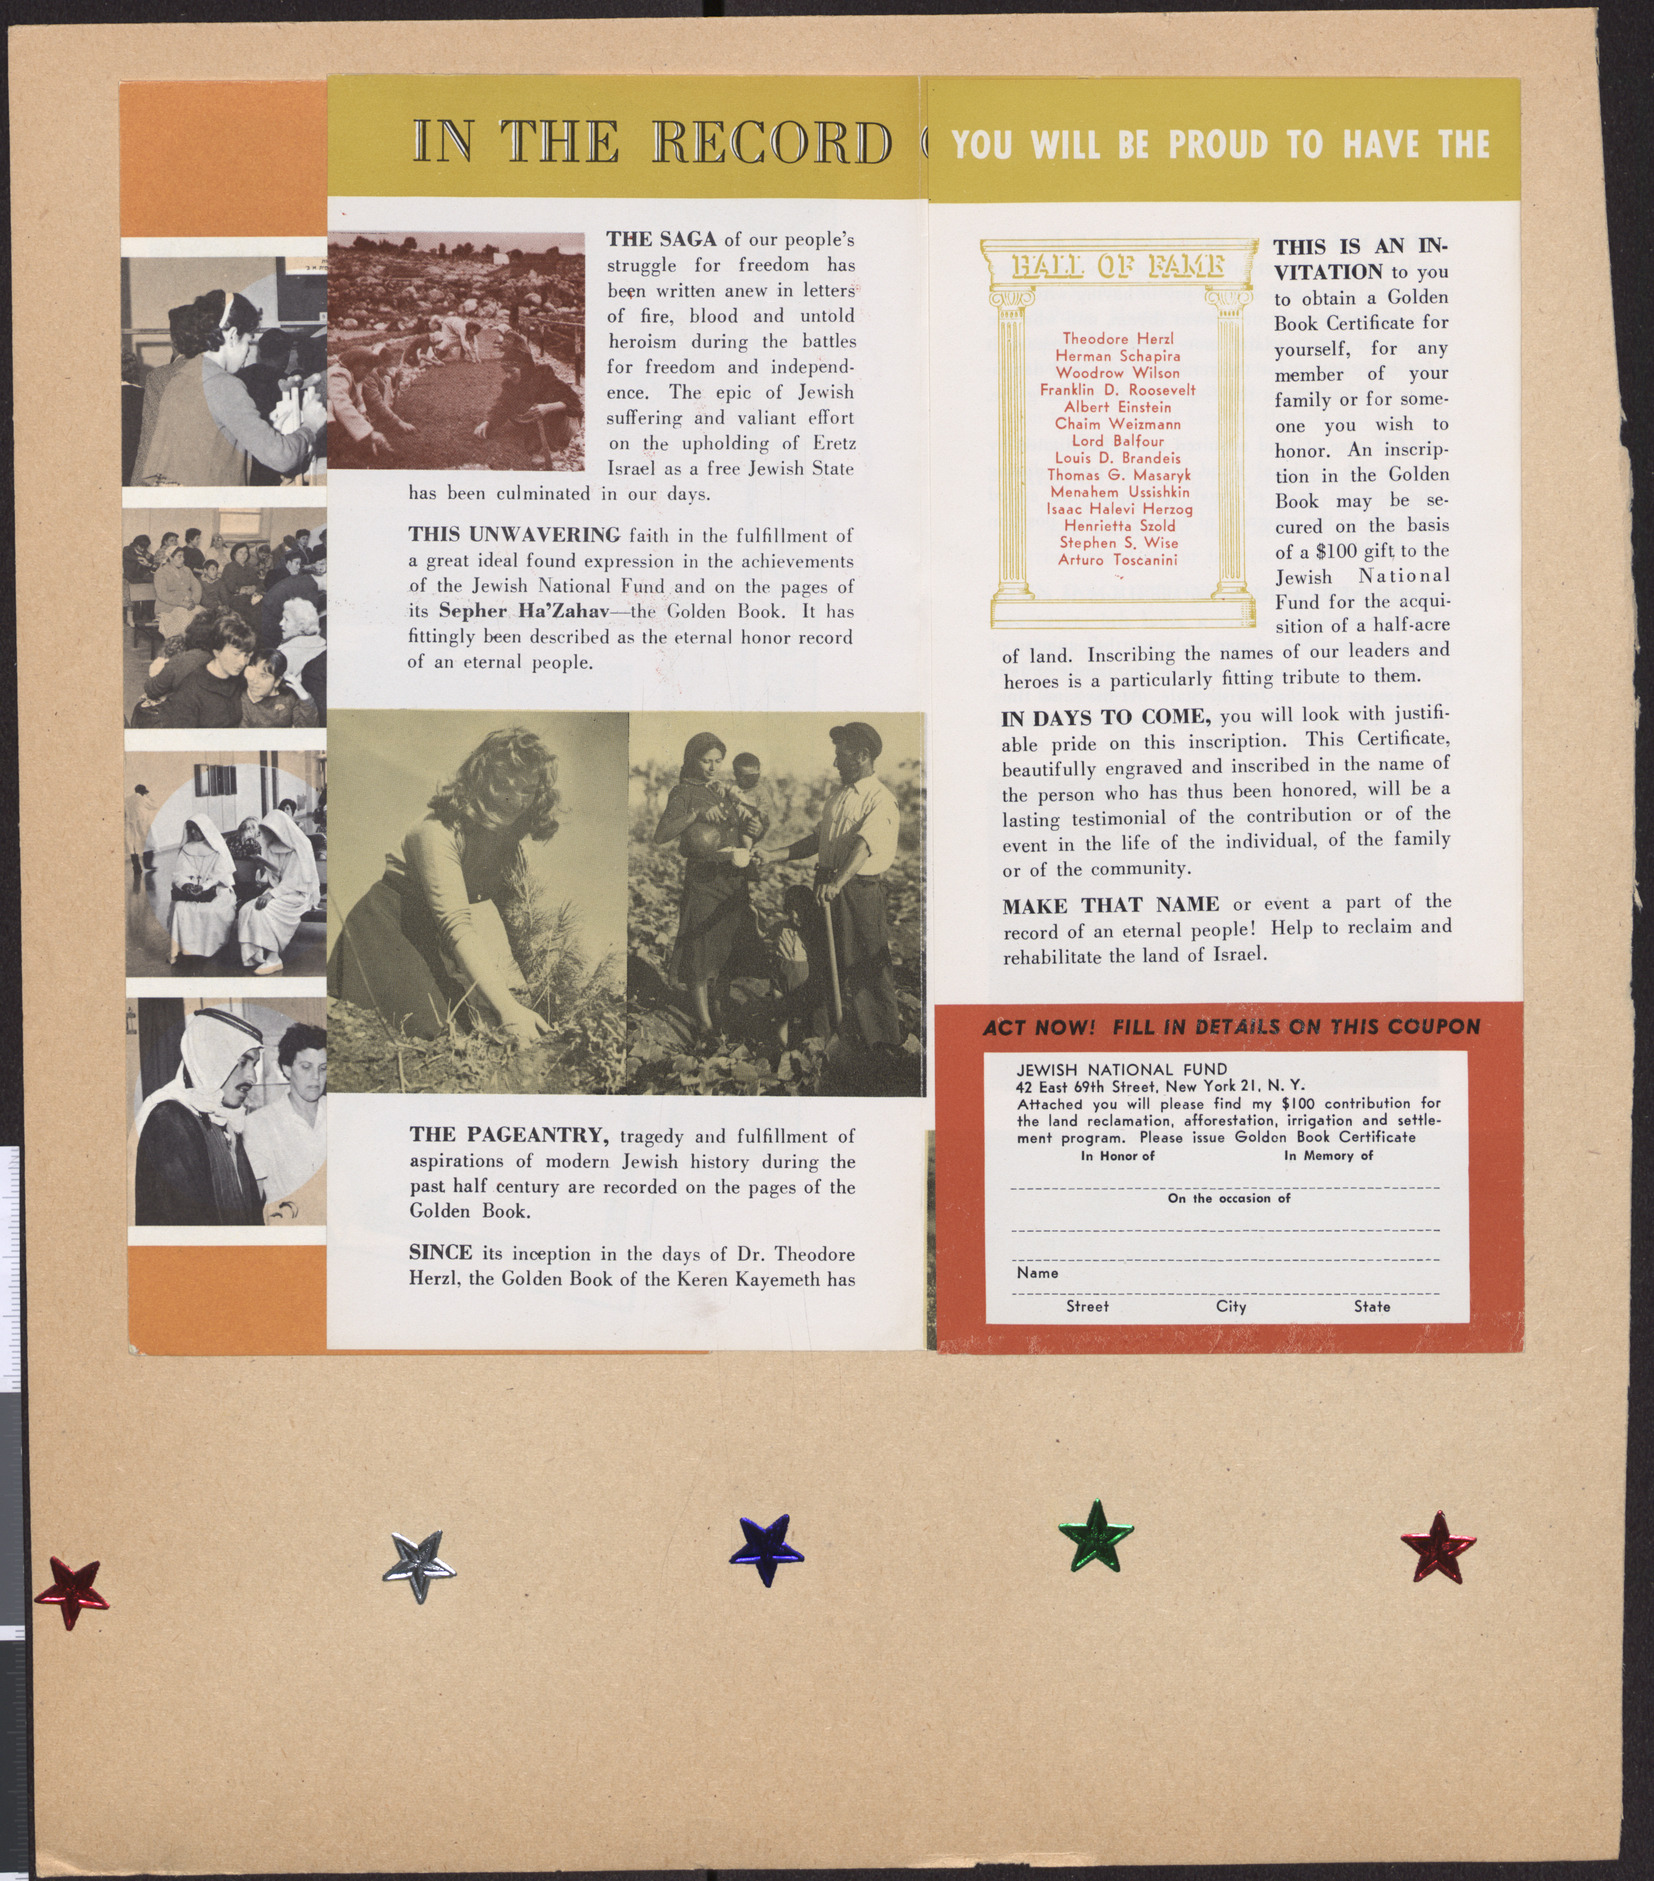 Brochure, The Jewish People's Roll of Honor, opening 1